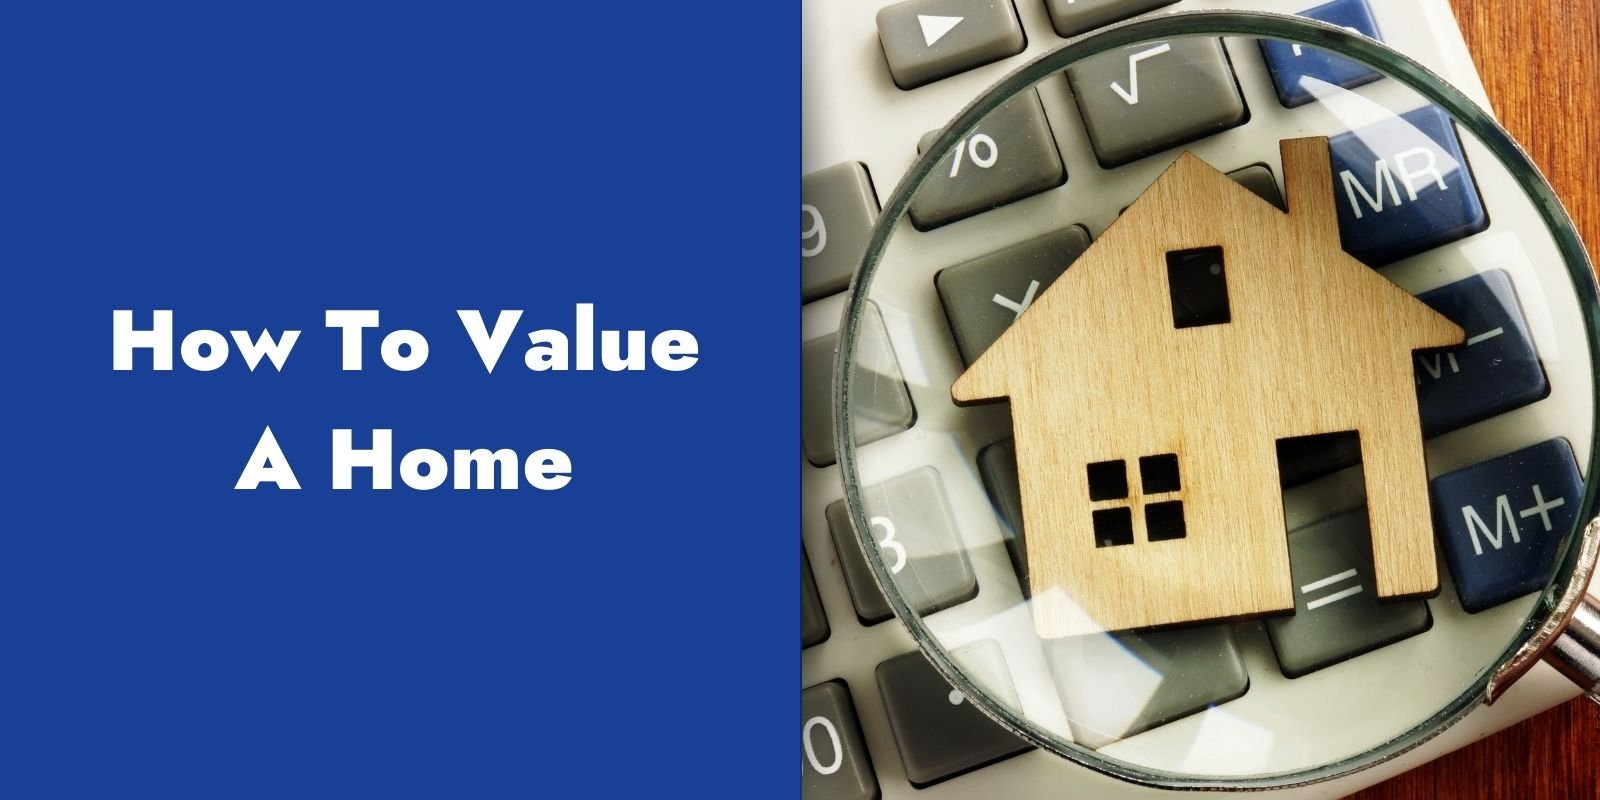 How To Value A Home